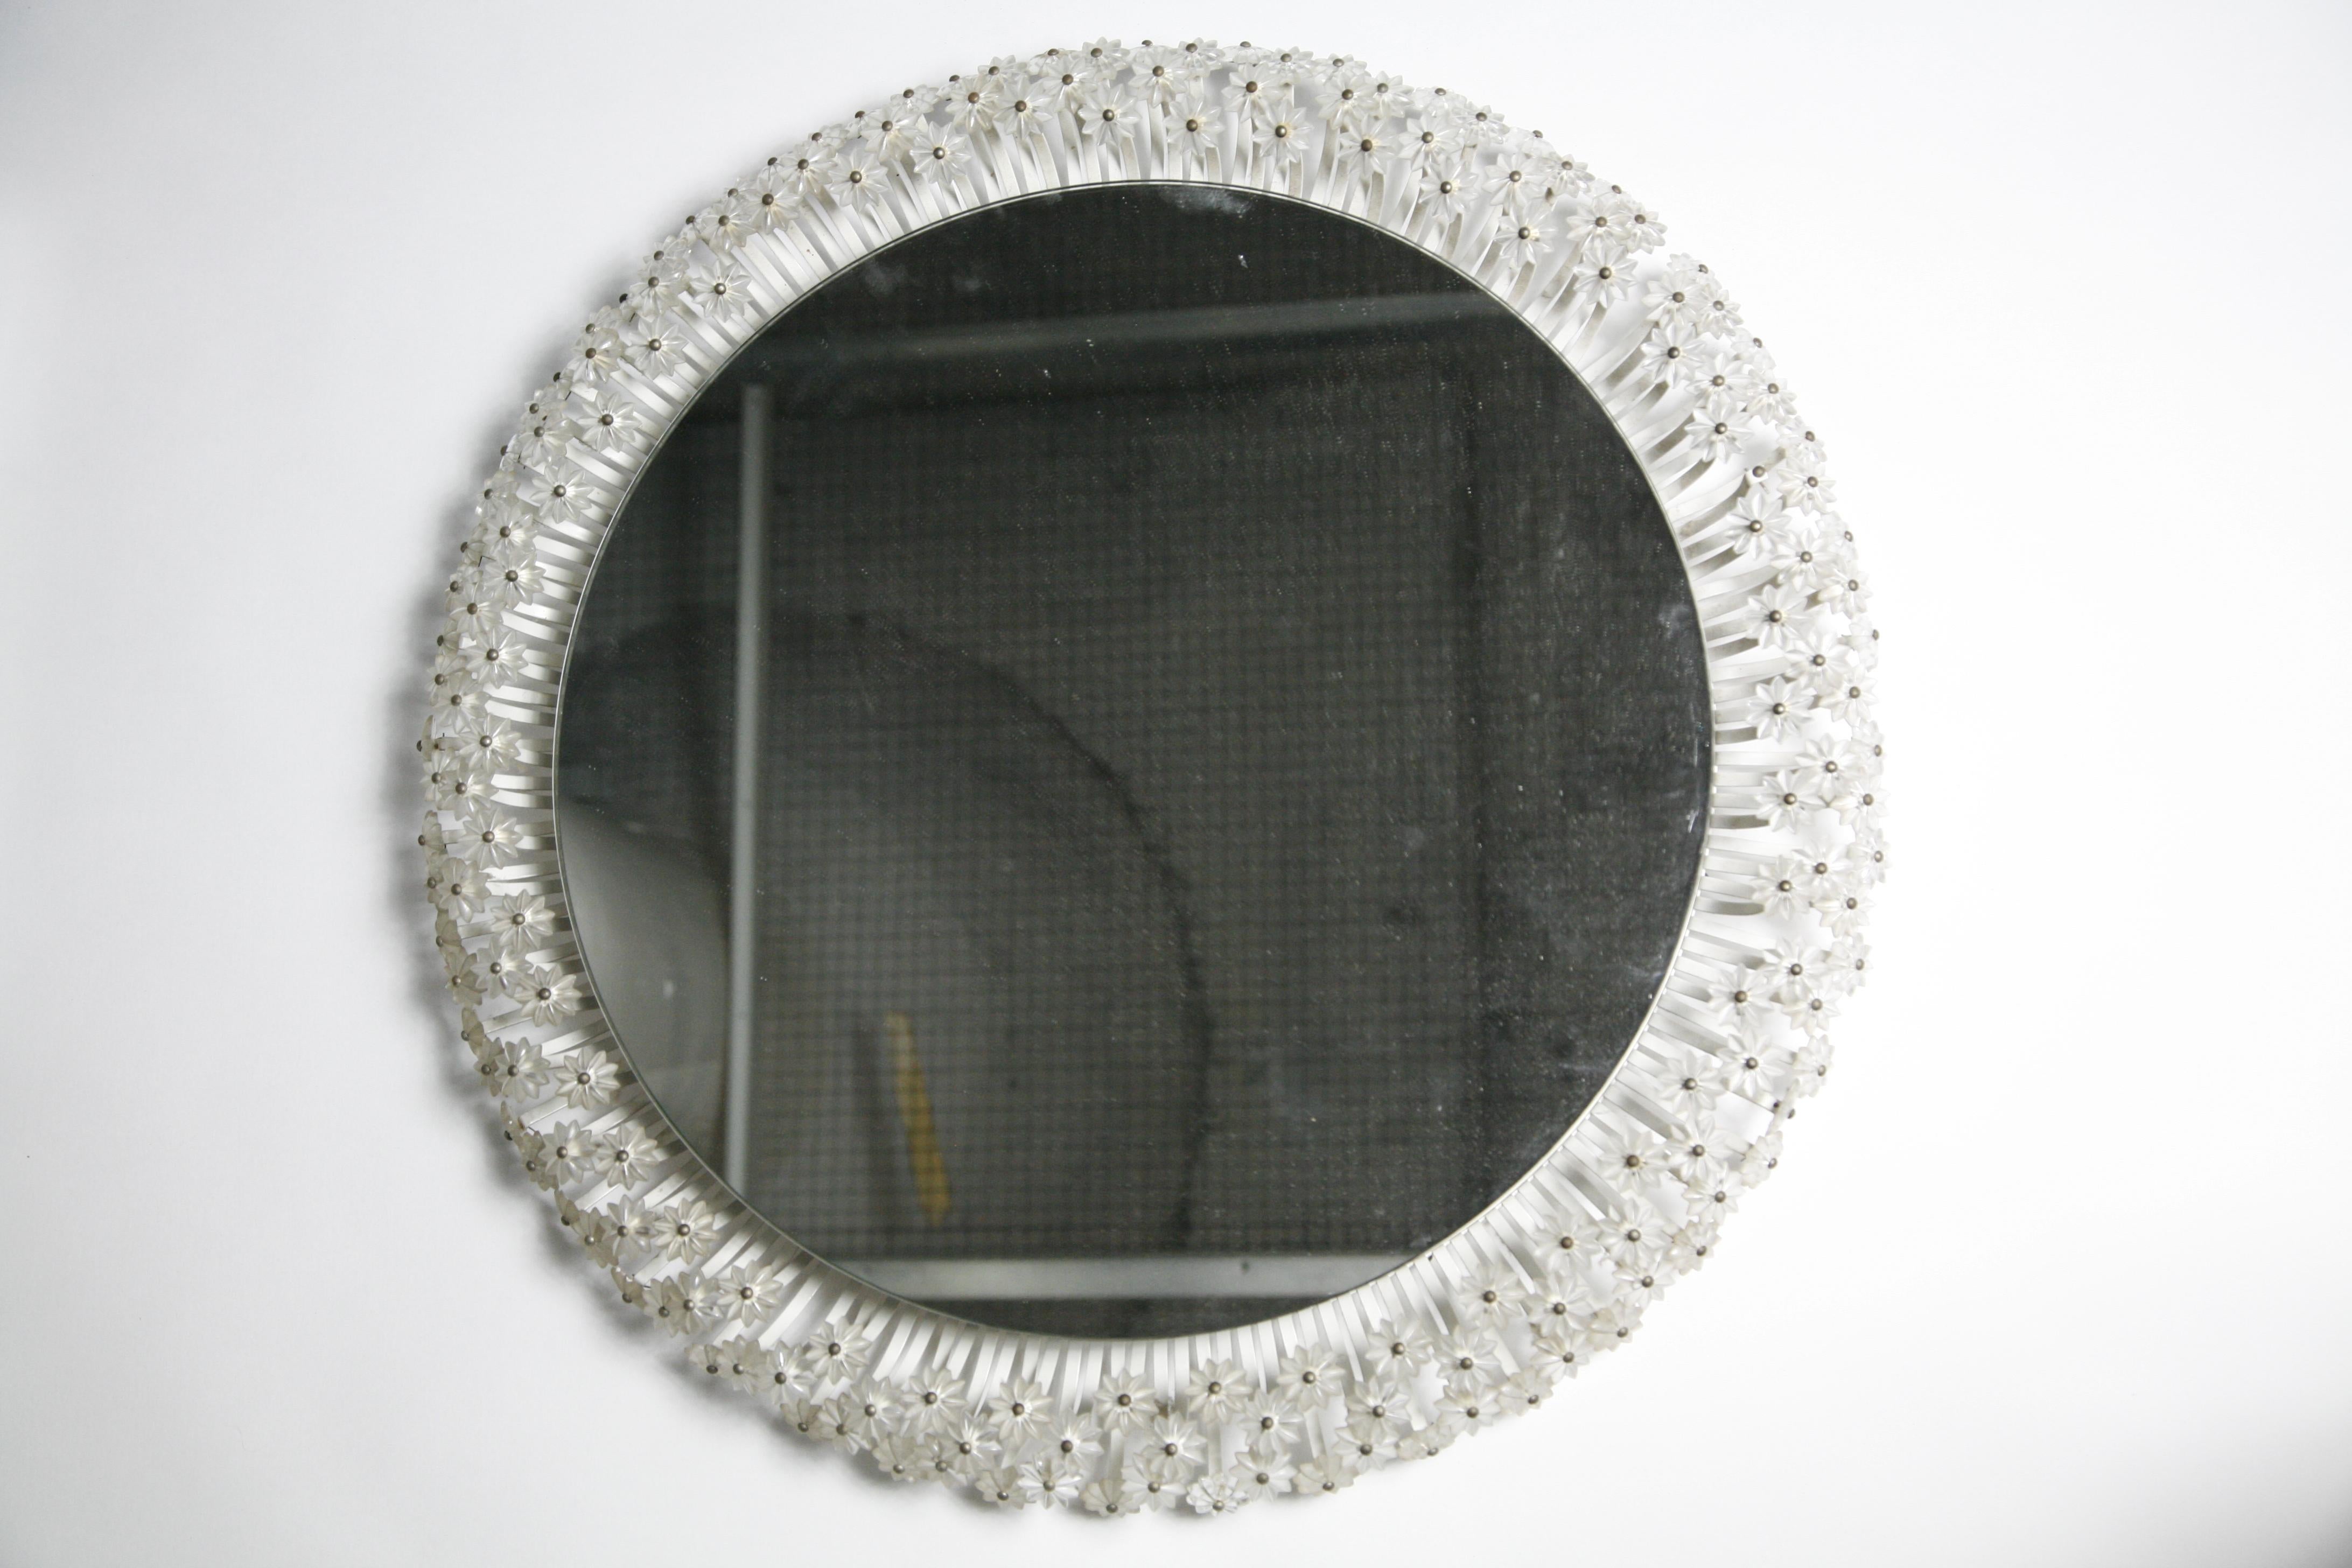 Emil Stejnar round mirror surrounded by numerous glass flowers on a frame that is white painted, lid up behind the mirror illuminates the tiny glass flowers surrounding the mirror.

Can be rewired upon request.